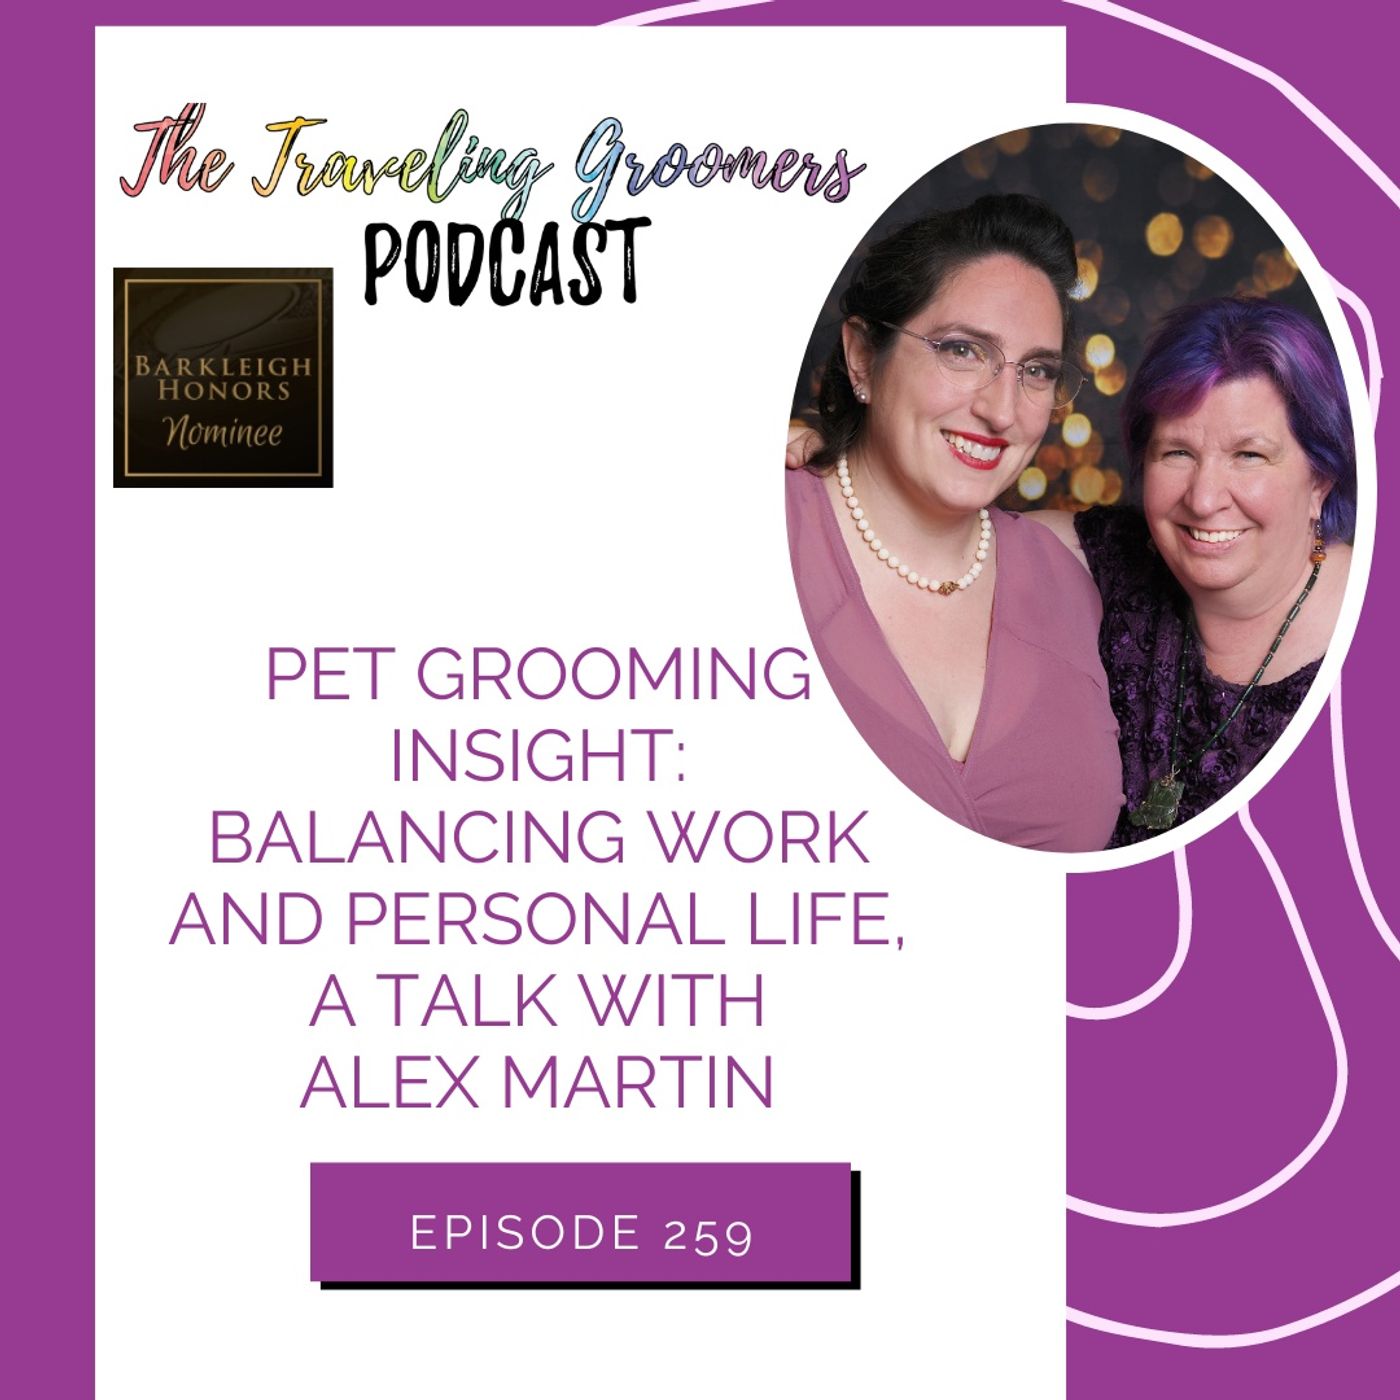 Pet Grooming Insight Balancing Work and Personal Life A Talk with Alex Martin